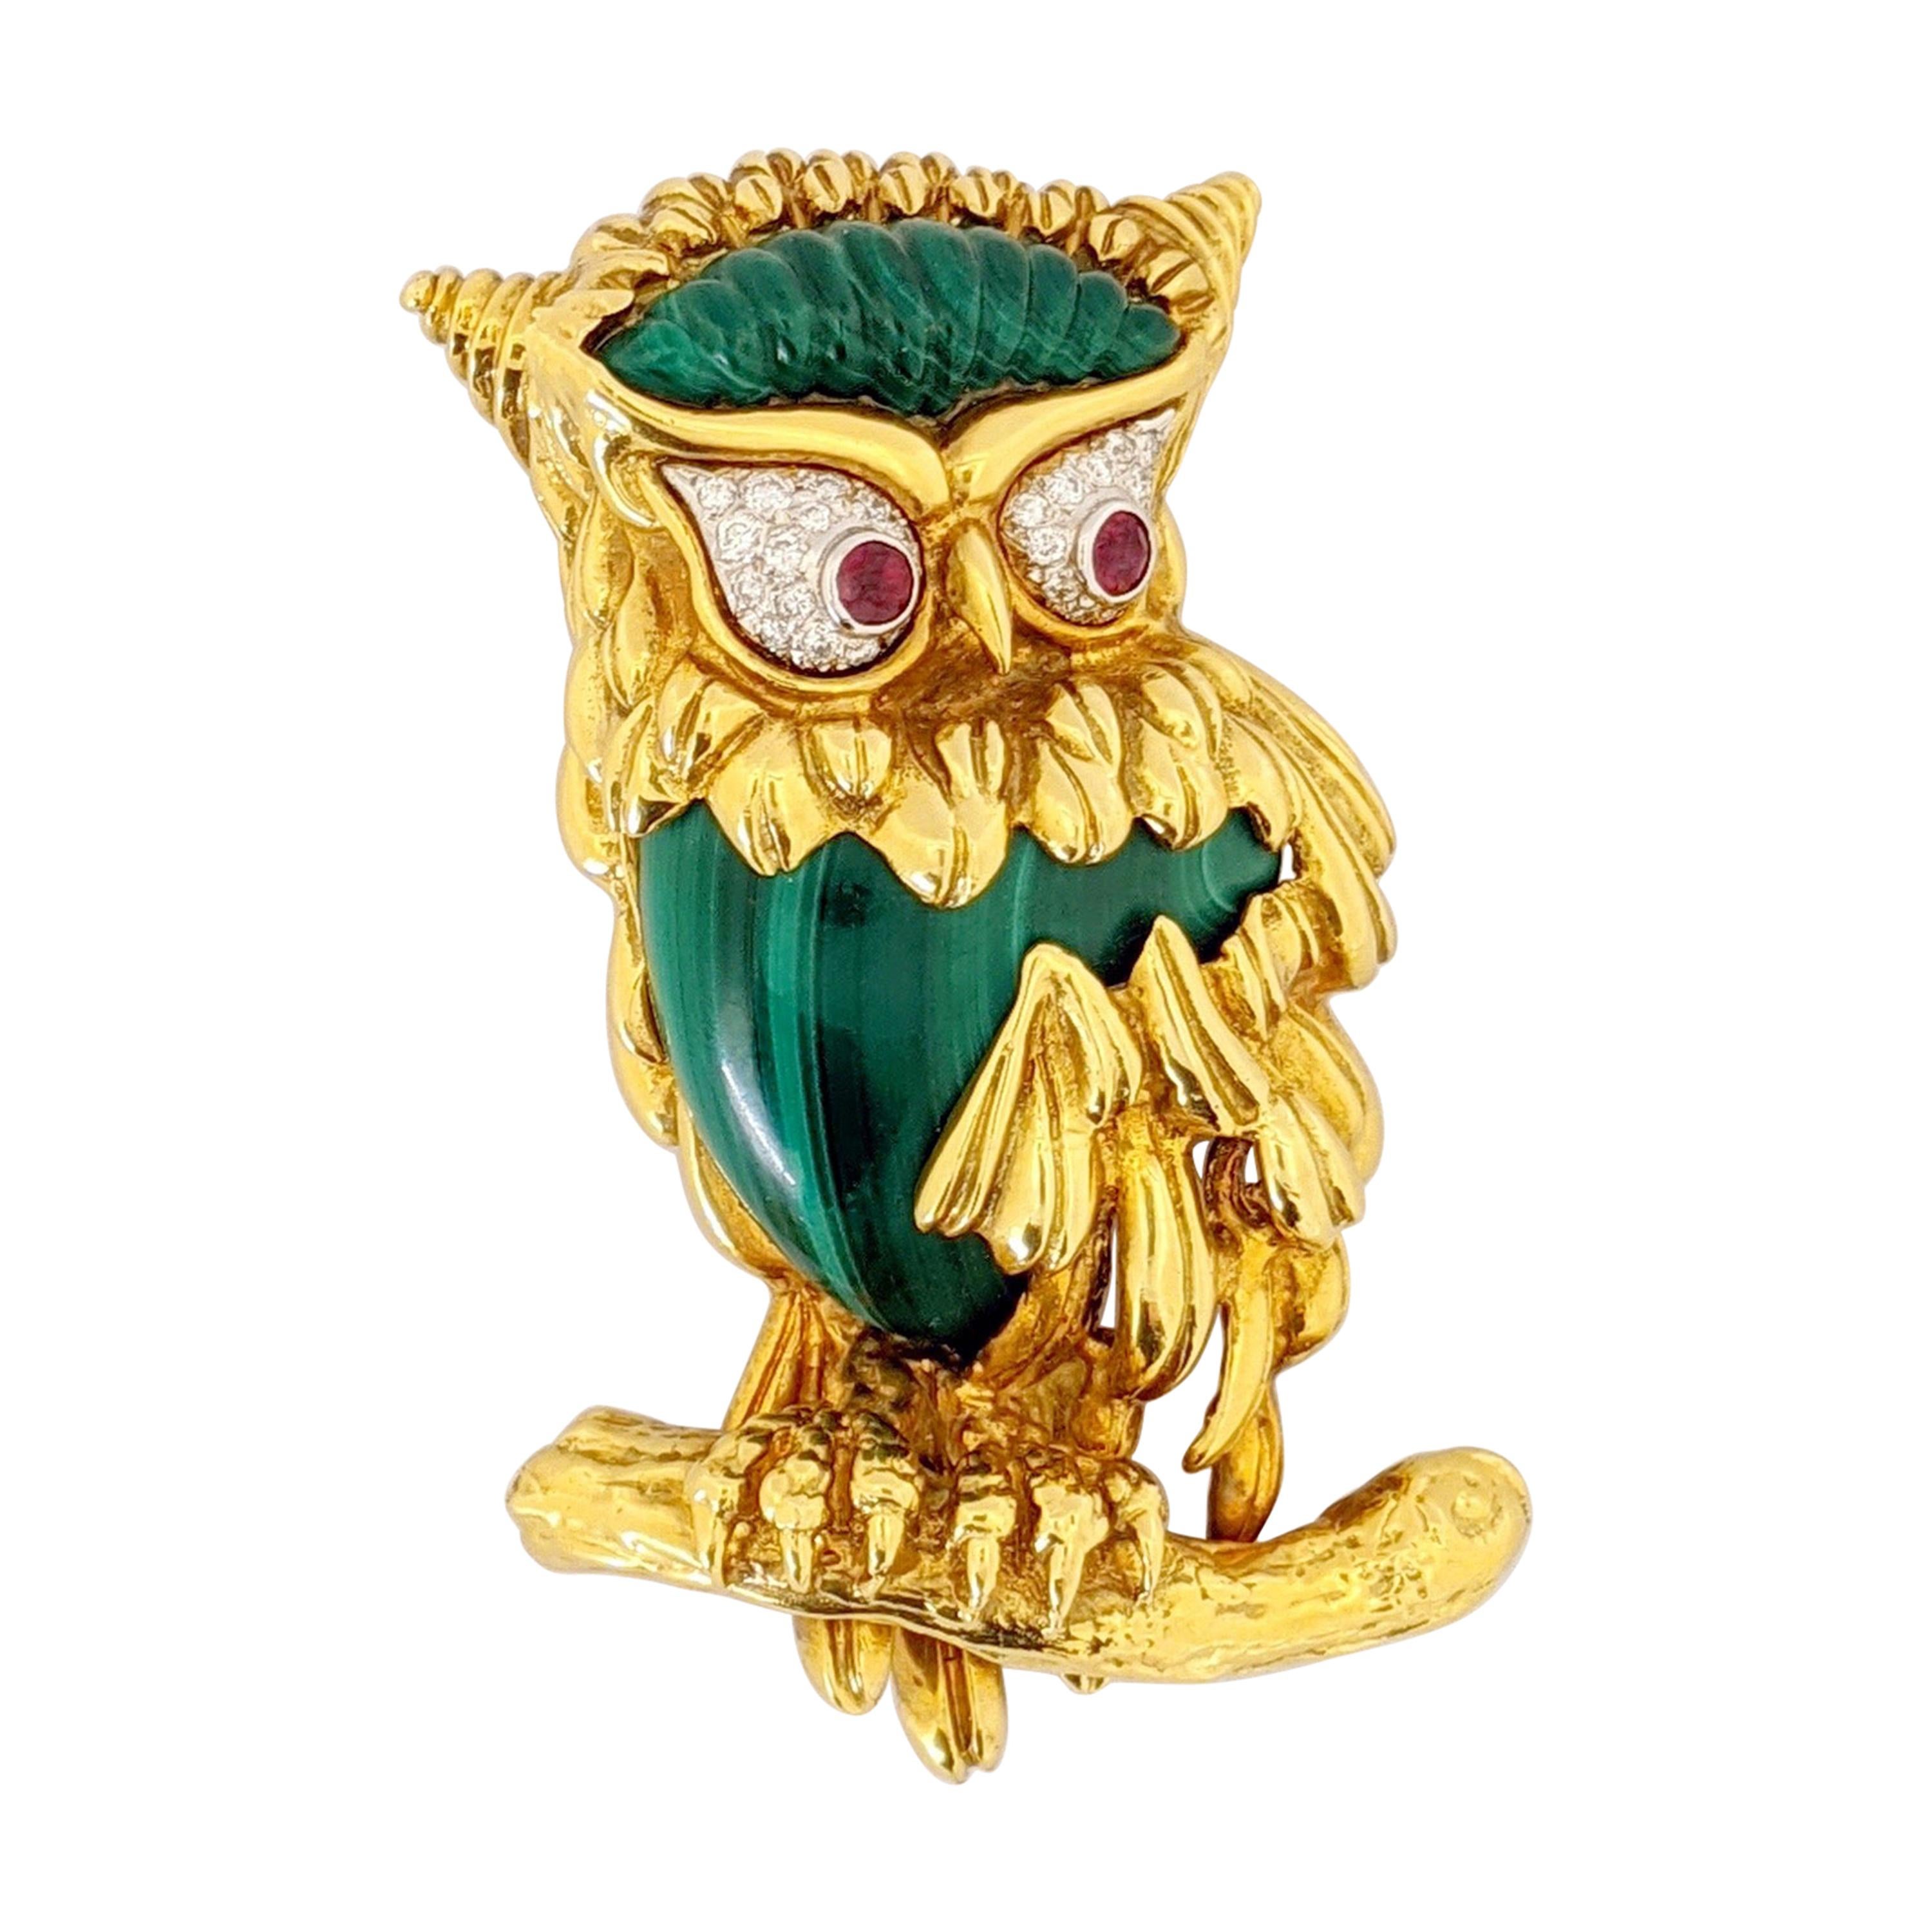 Carrera Y Carrera 18 Karat Gold Owl Brooch with Diamond, Malachite and Ruby For Sale